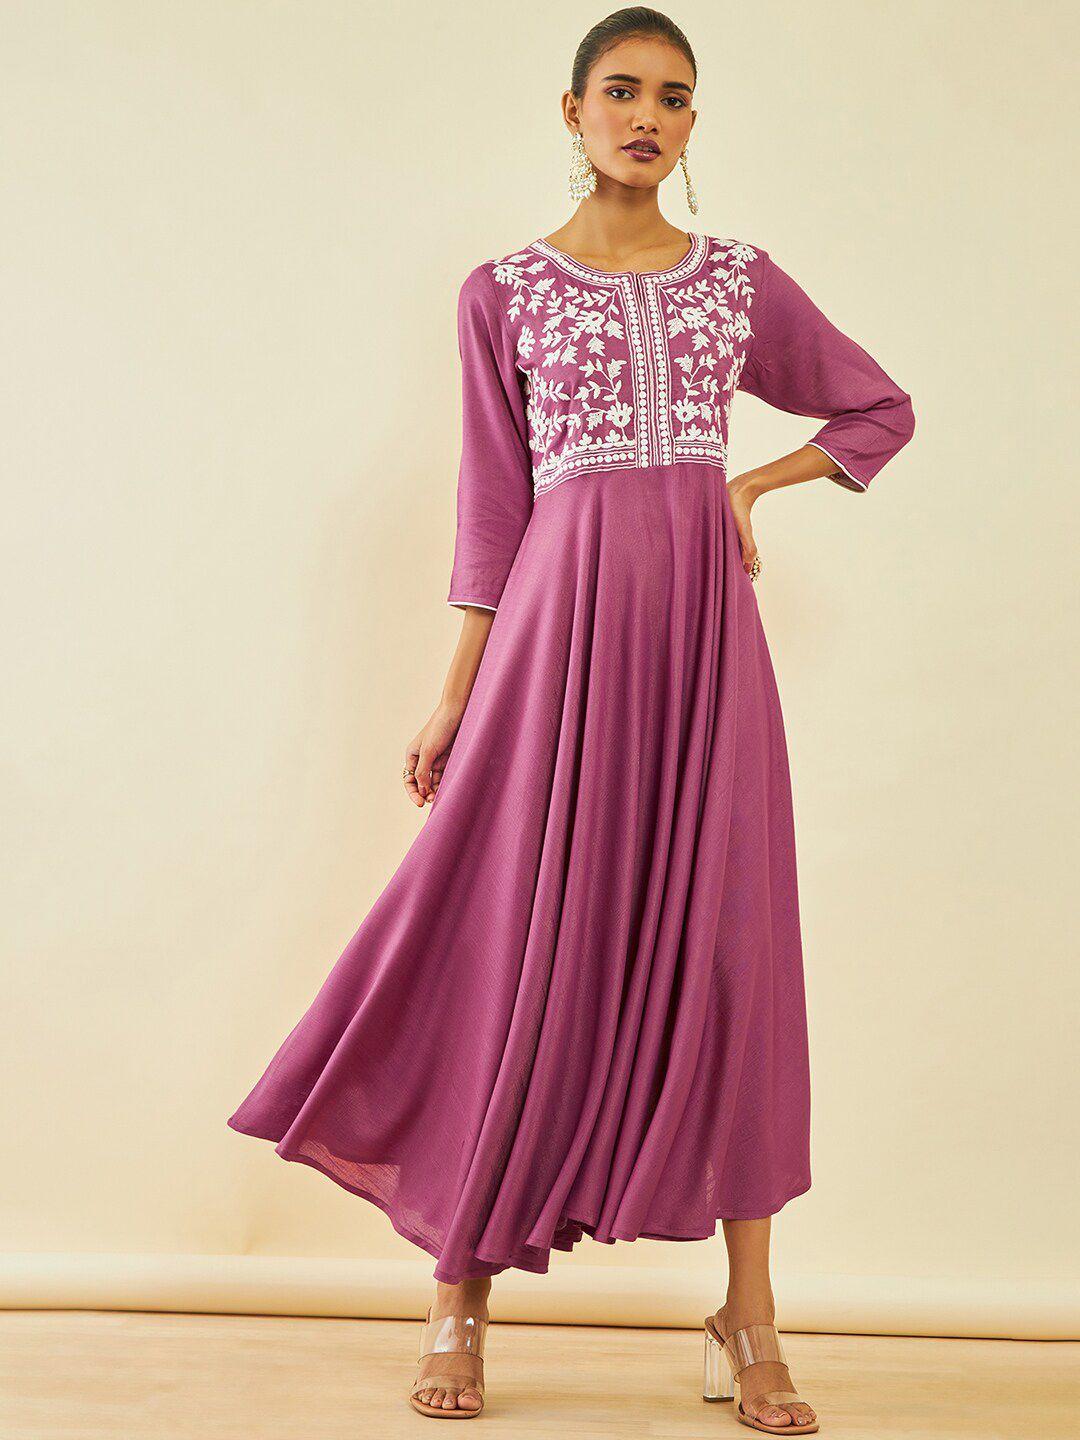 soch-floral-embroidered-fit-&-flare-maxi-ethnic-dress